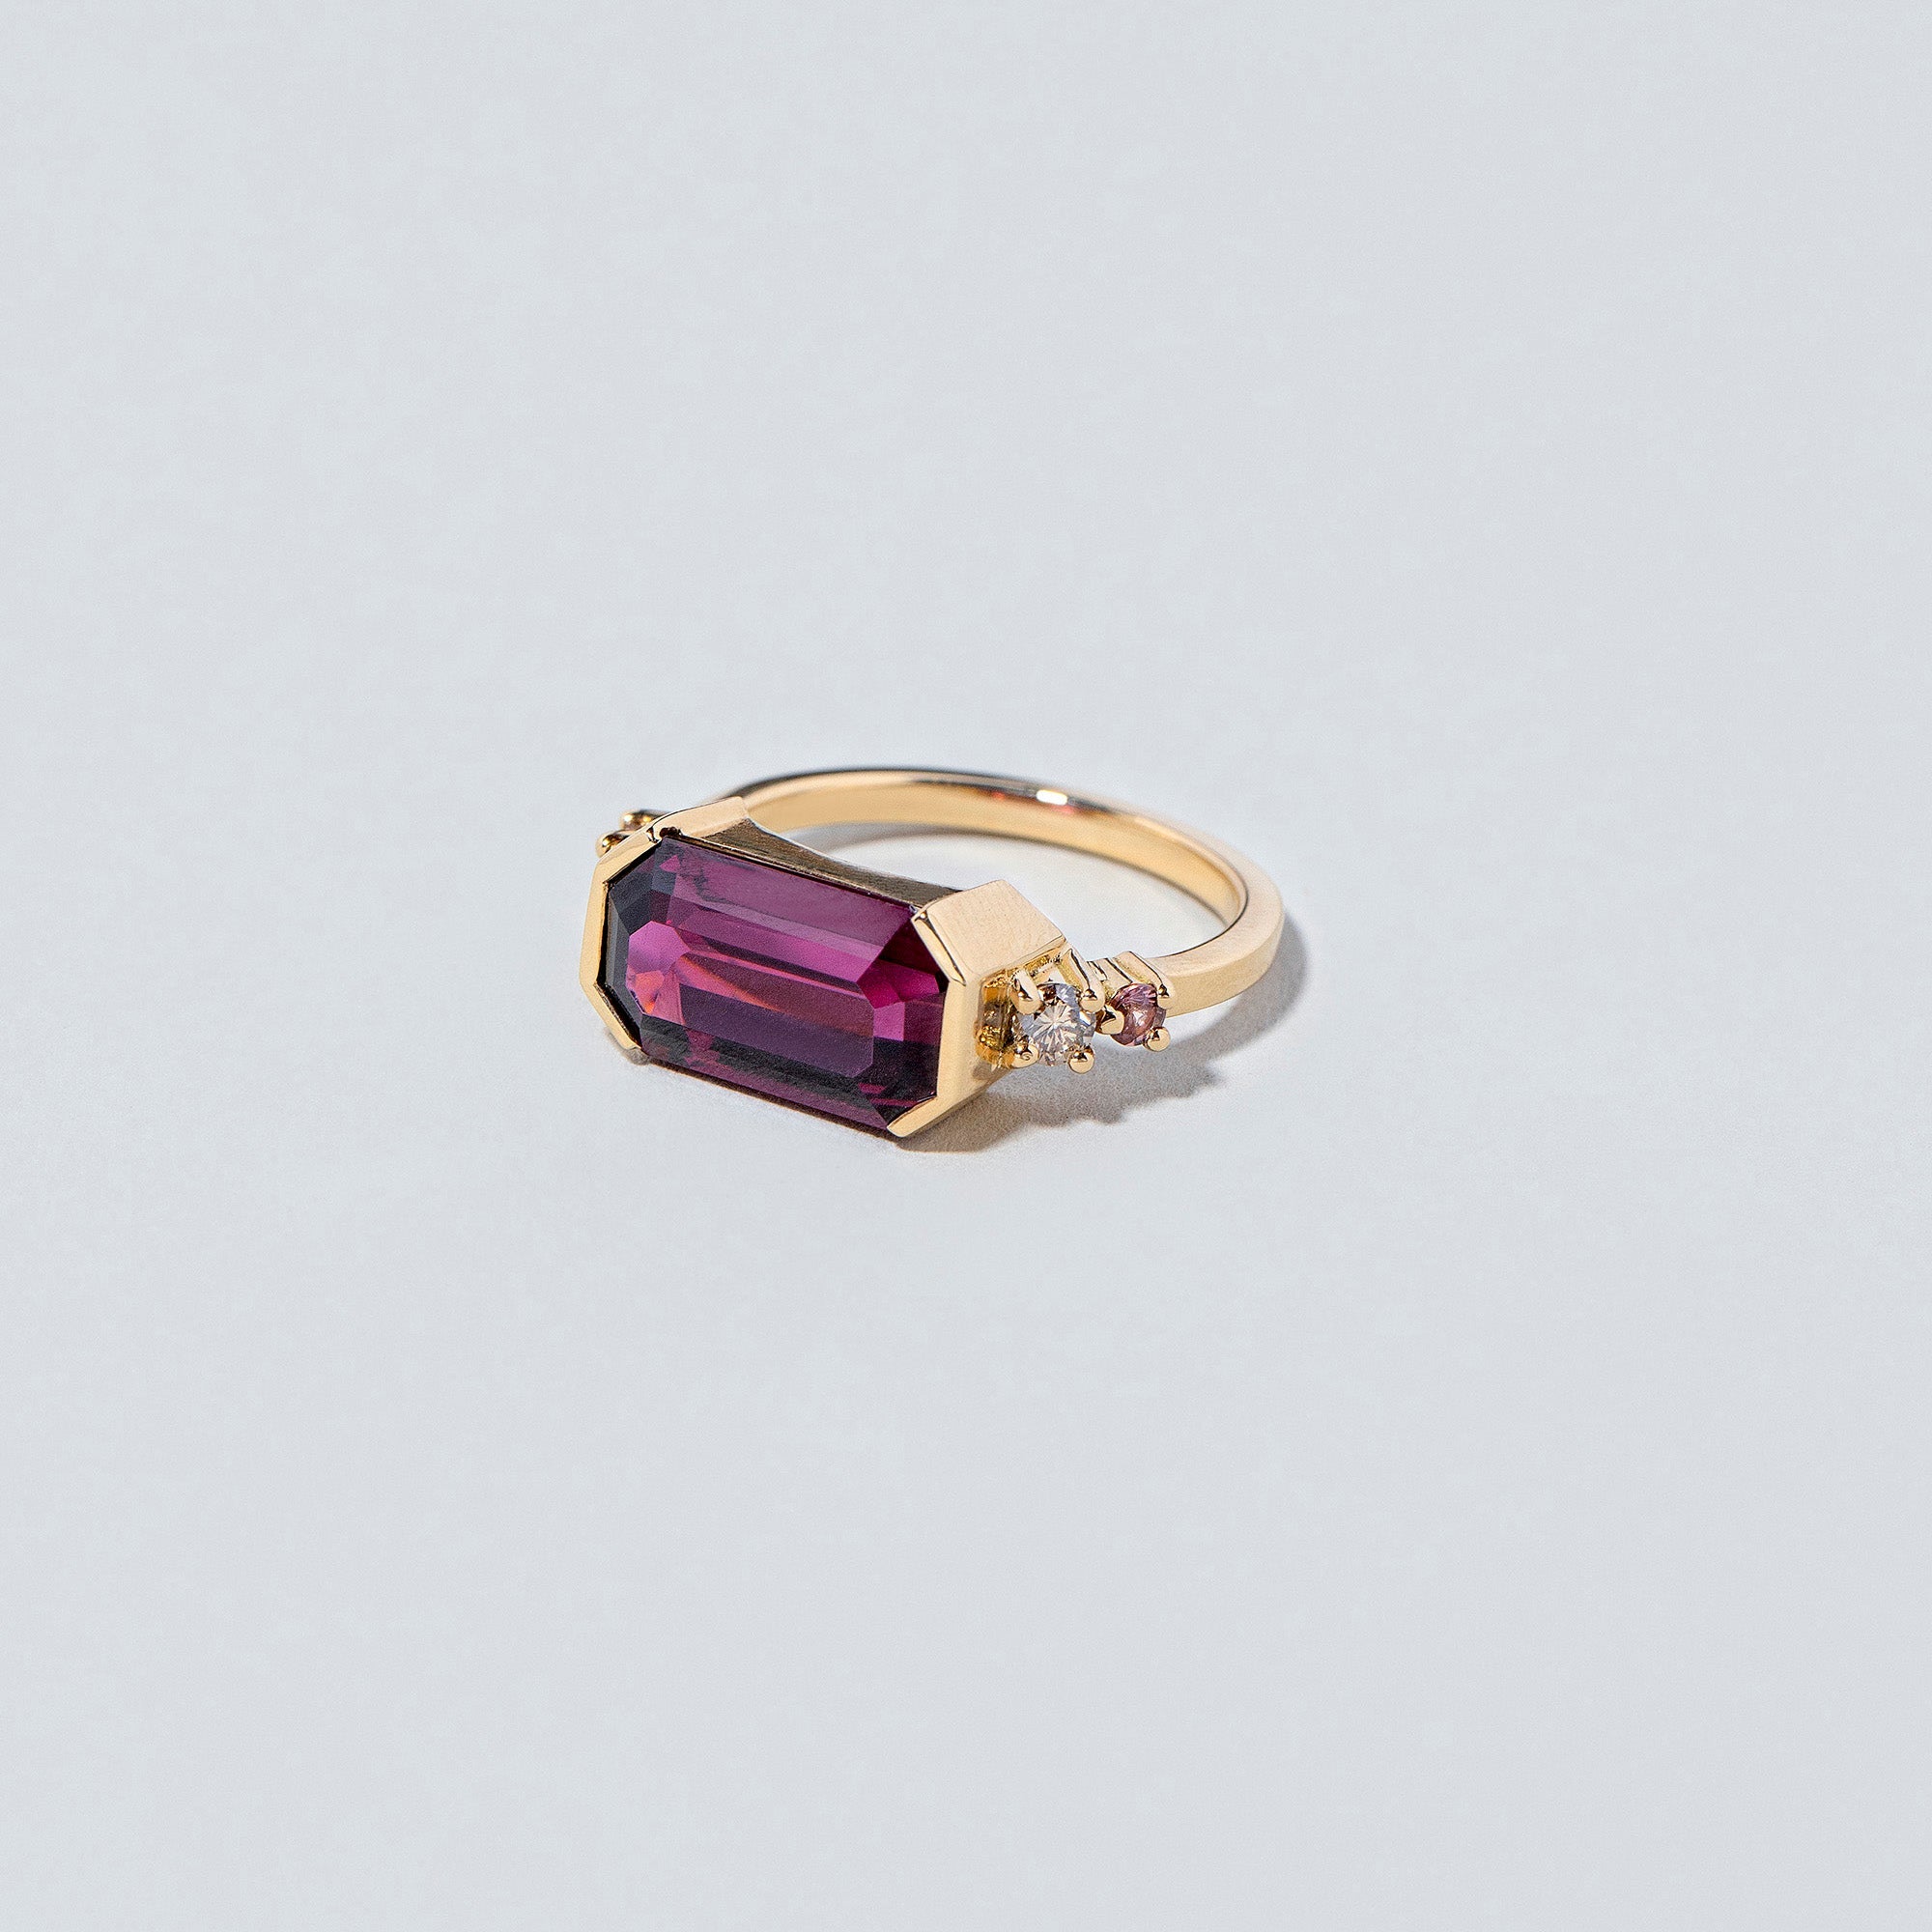 product_details:: Mesa Ring on light color background.